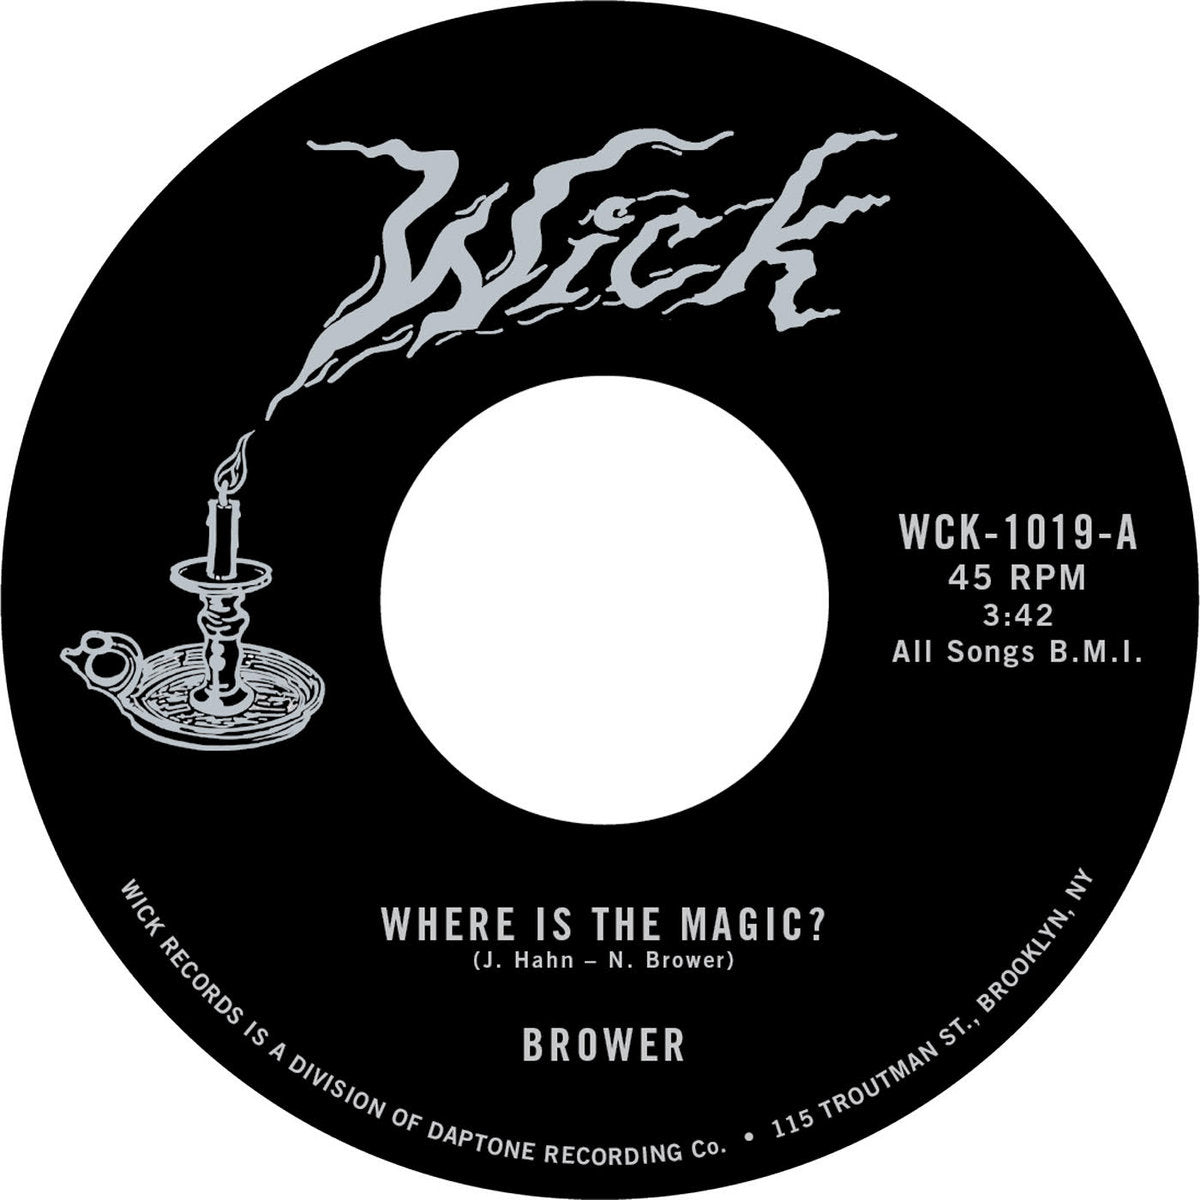 Brower - "Where is the Magic?" 45